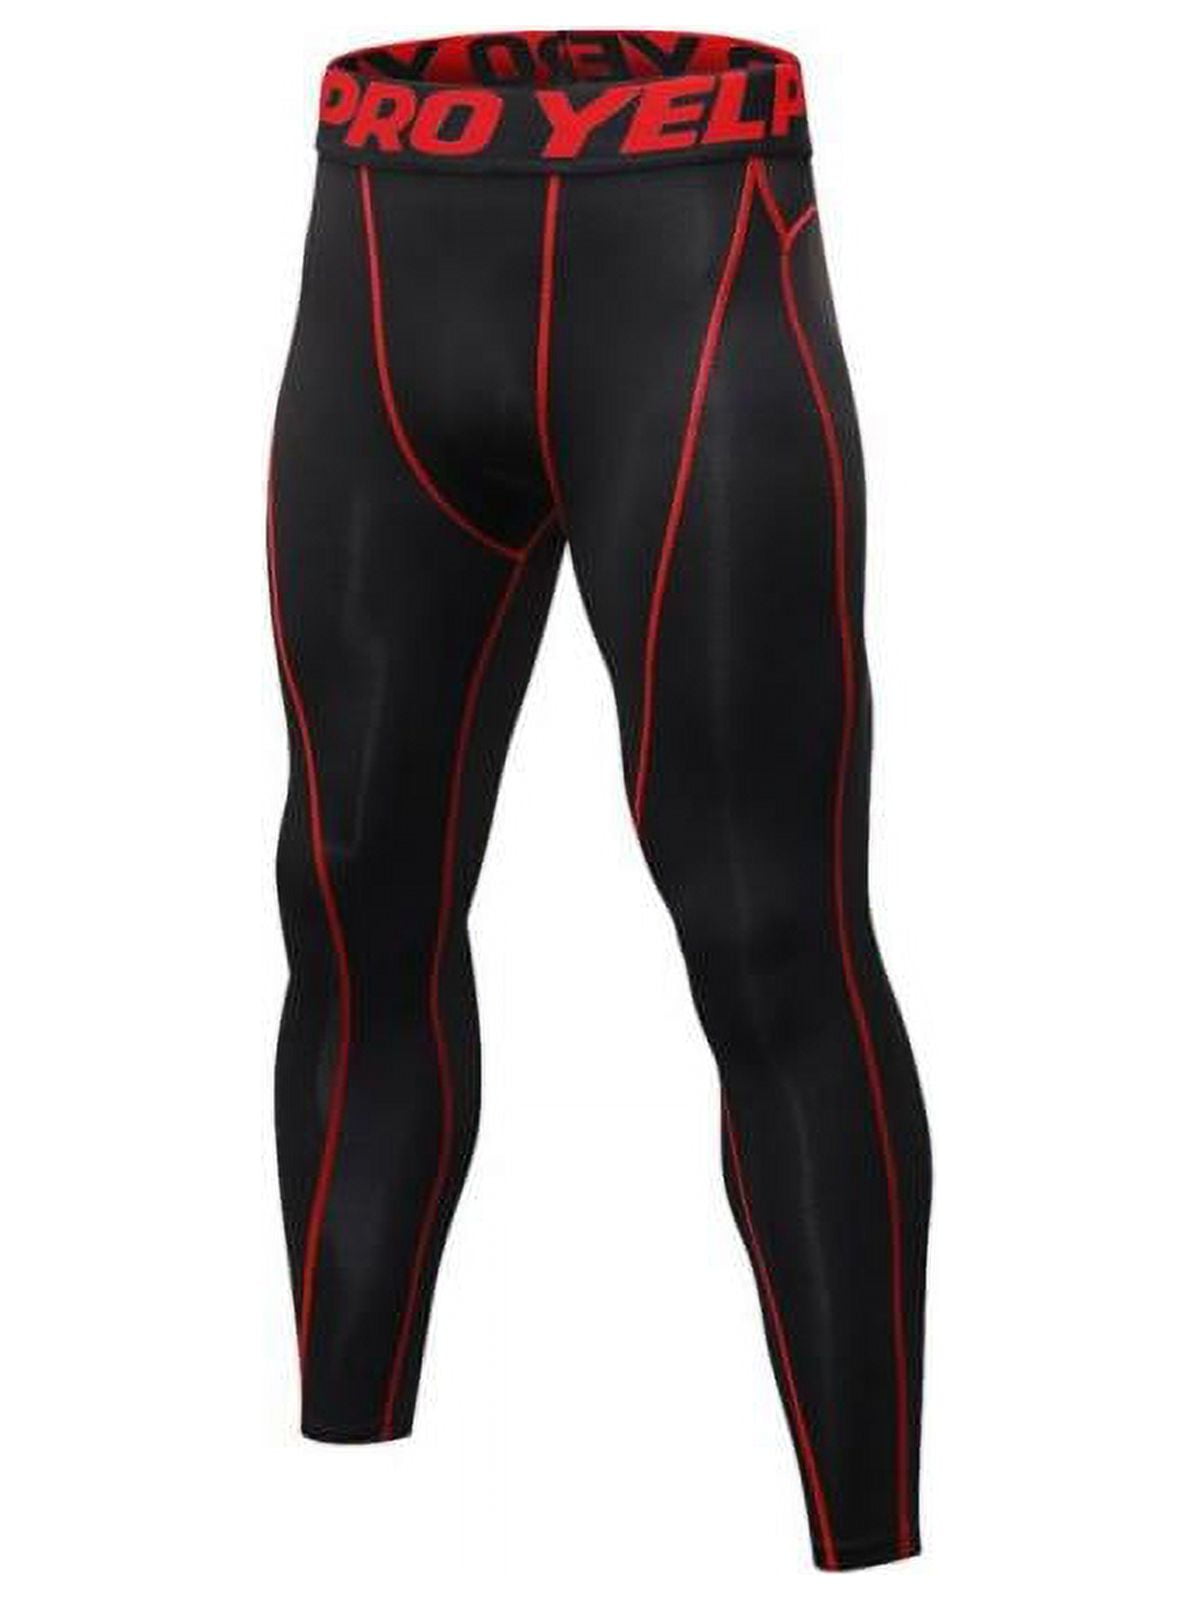 Sportinger Compression Pants Tights, Skins, Men's Legging, Base Layer for  Gym, Running, Swimming, Cricket, Cycling, Football, Yoga, Basketball